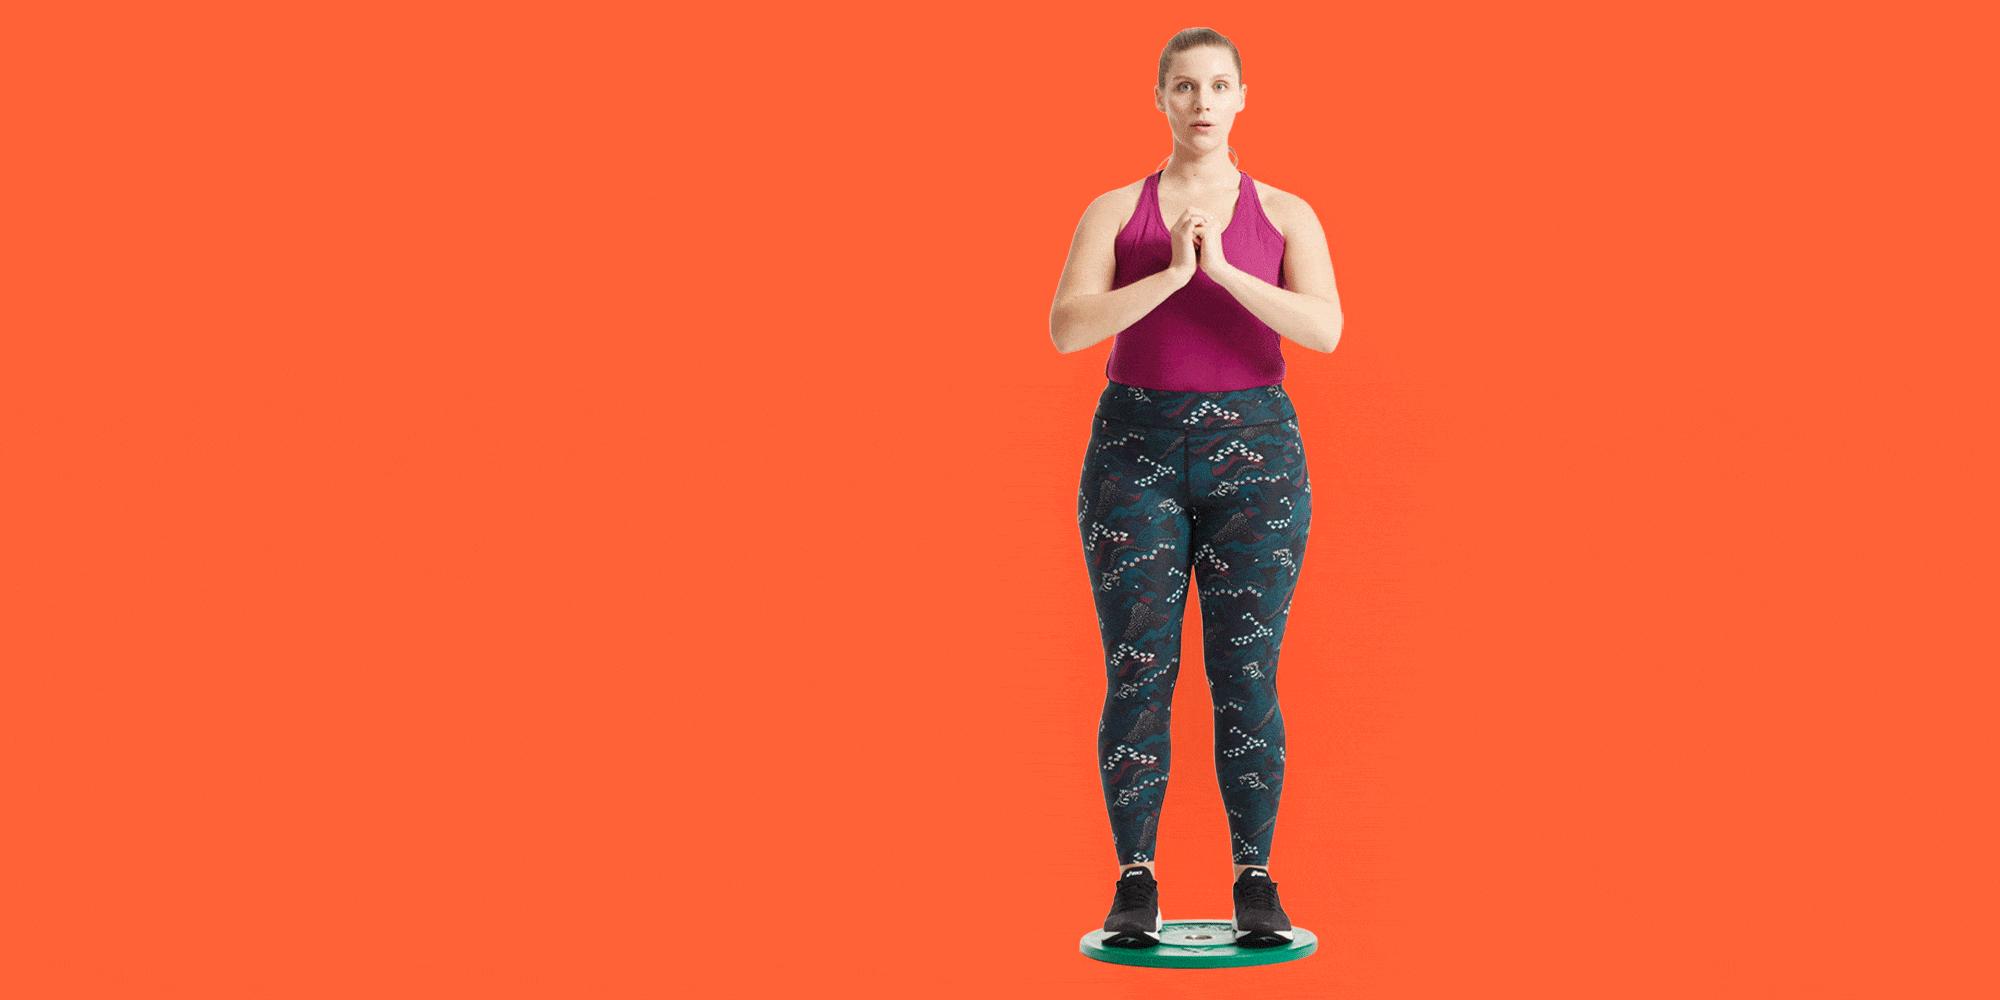 SIDE LUNGE STRETCH | 10 Best After Workout Stretch Moves For Whole Body